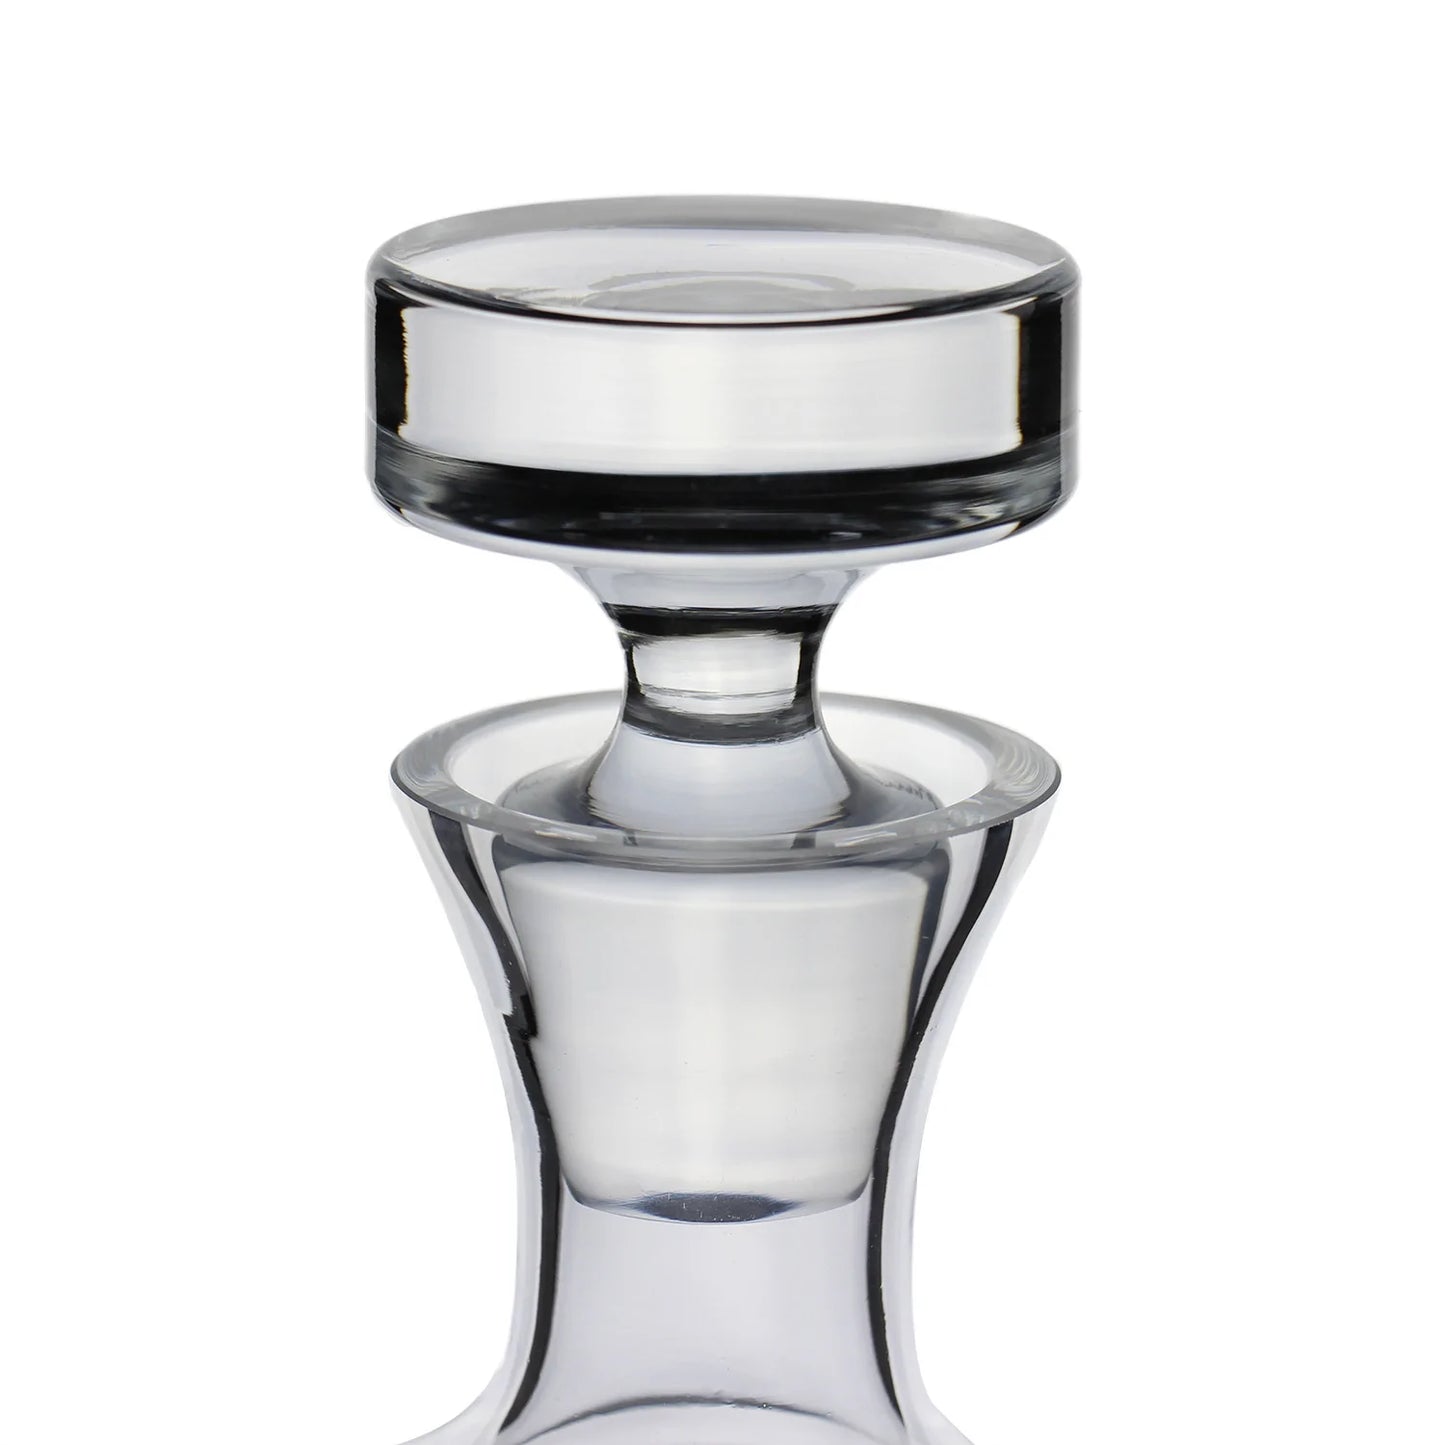 Ravenscroft Crystal Buckingham Decanter with Free Luxury Satin Decanter and Stopper Bags W3134